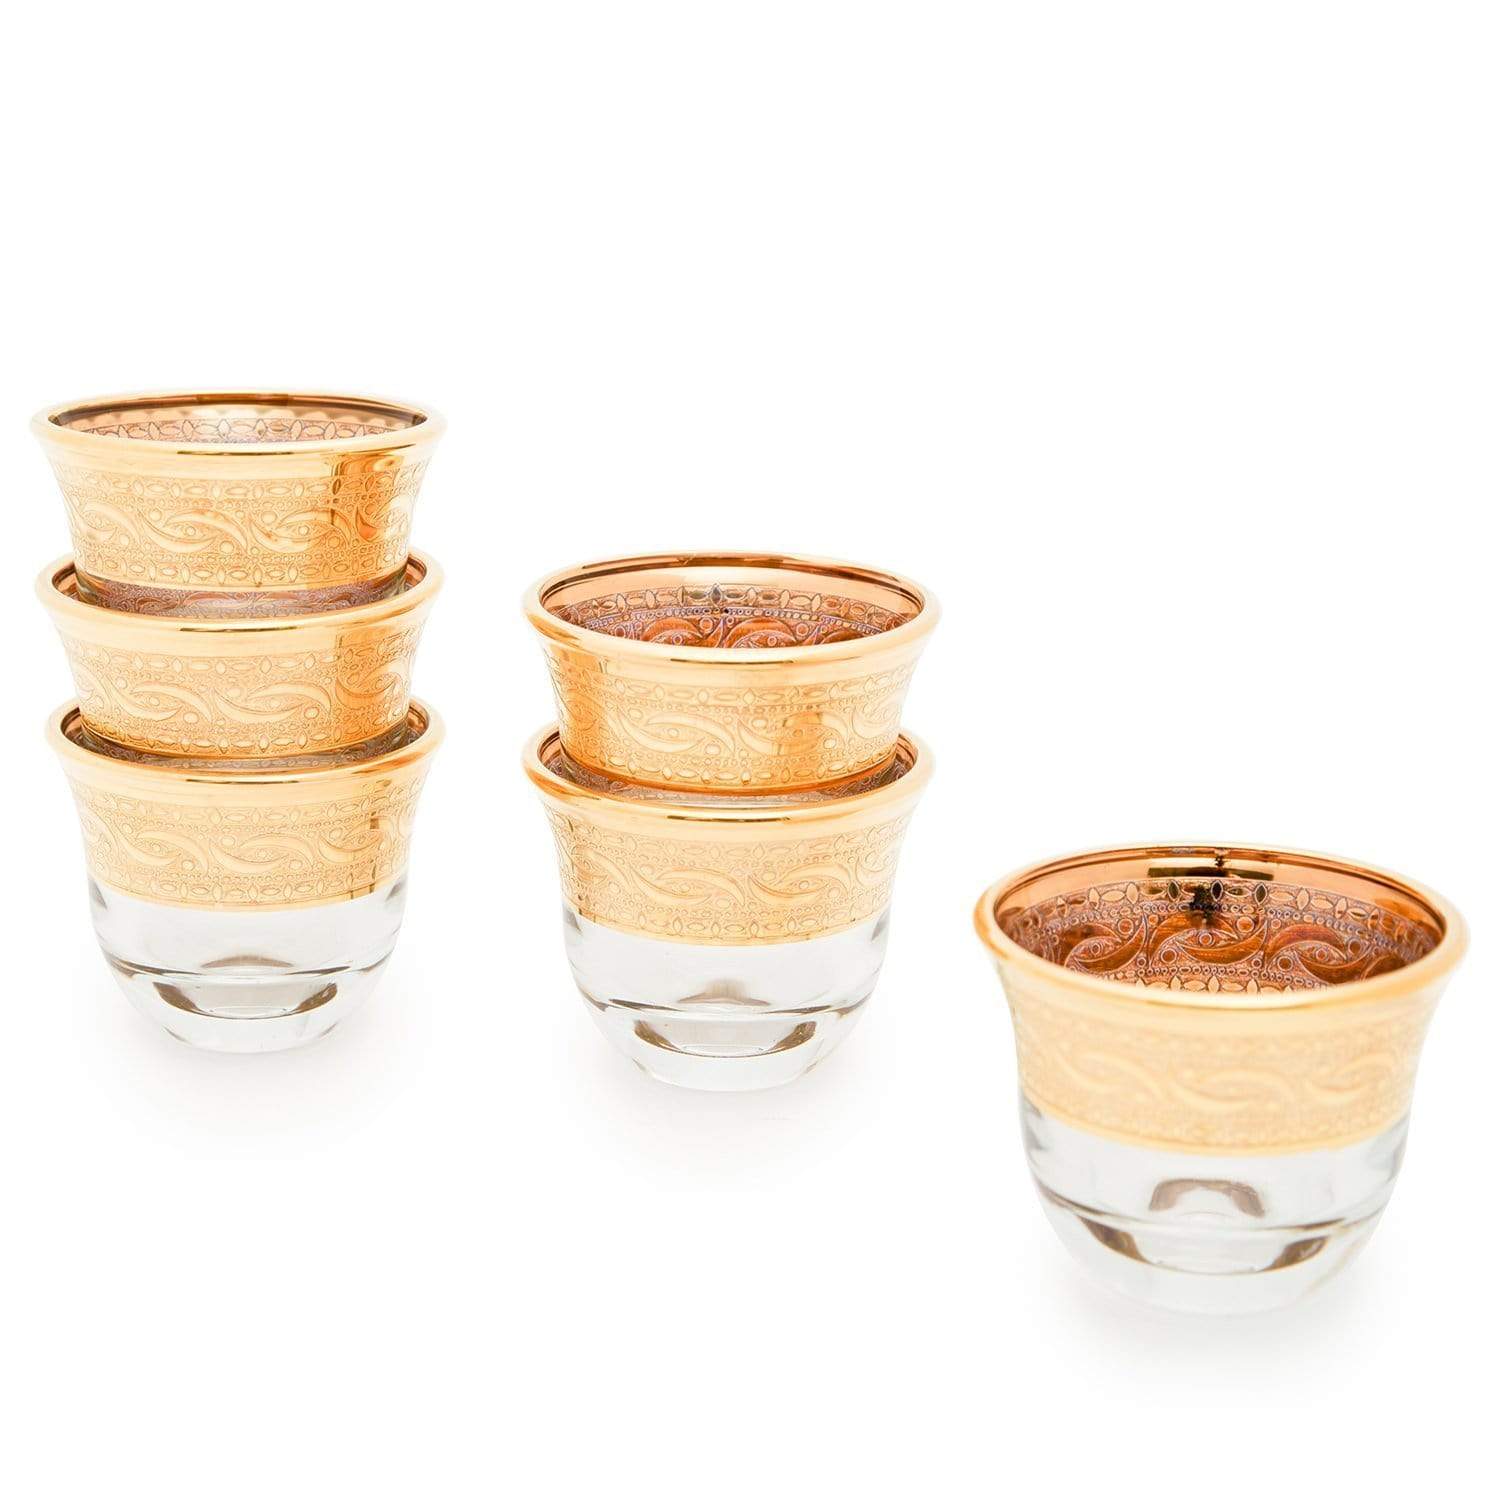 Combi Catriona Mocca Cup Set - Gold, 6 Piece - G569Z/48 - Jashanmal Home